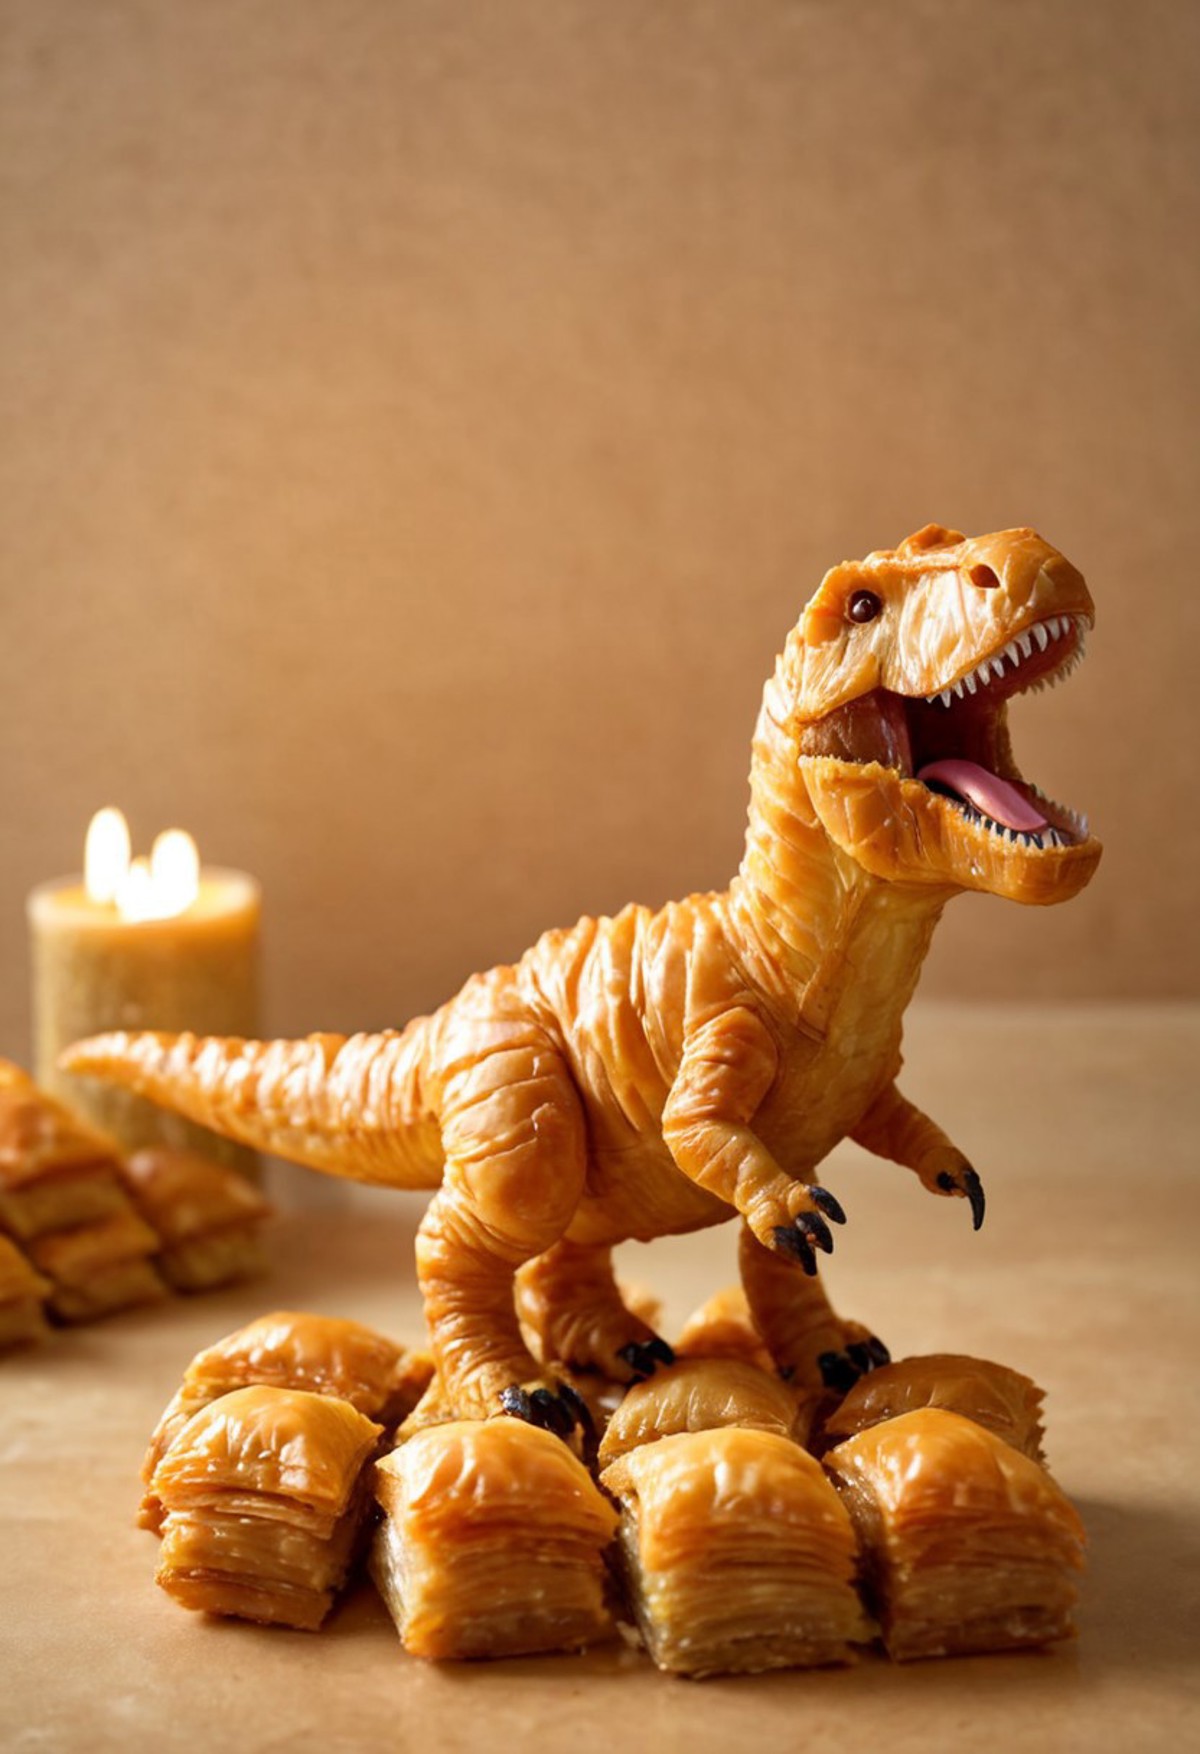 A pastry shaped like a Tyrannosaurus Rex standing on a table. The dinosaur pastry is positioned in an upright stance with its mouth open, as if roaring. Surrounding the base of the dinosaur are additional pieces of pastry. In the background, there is a lit candle, providing a warm ambiance to the setting. 